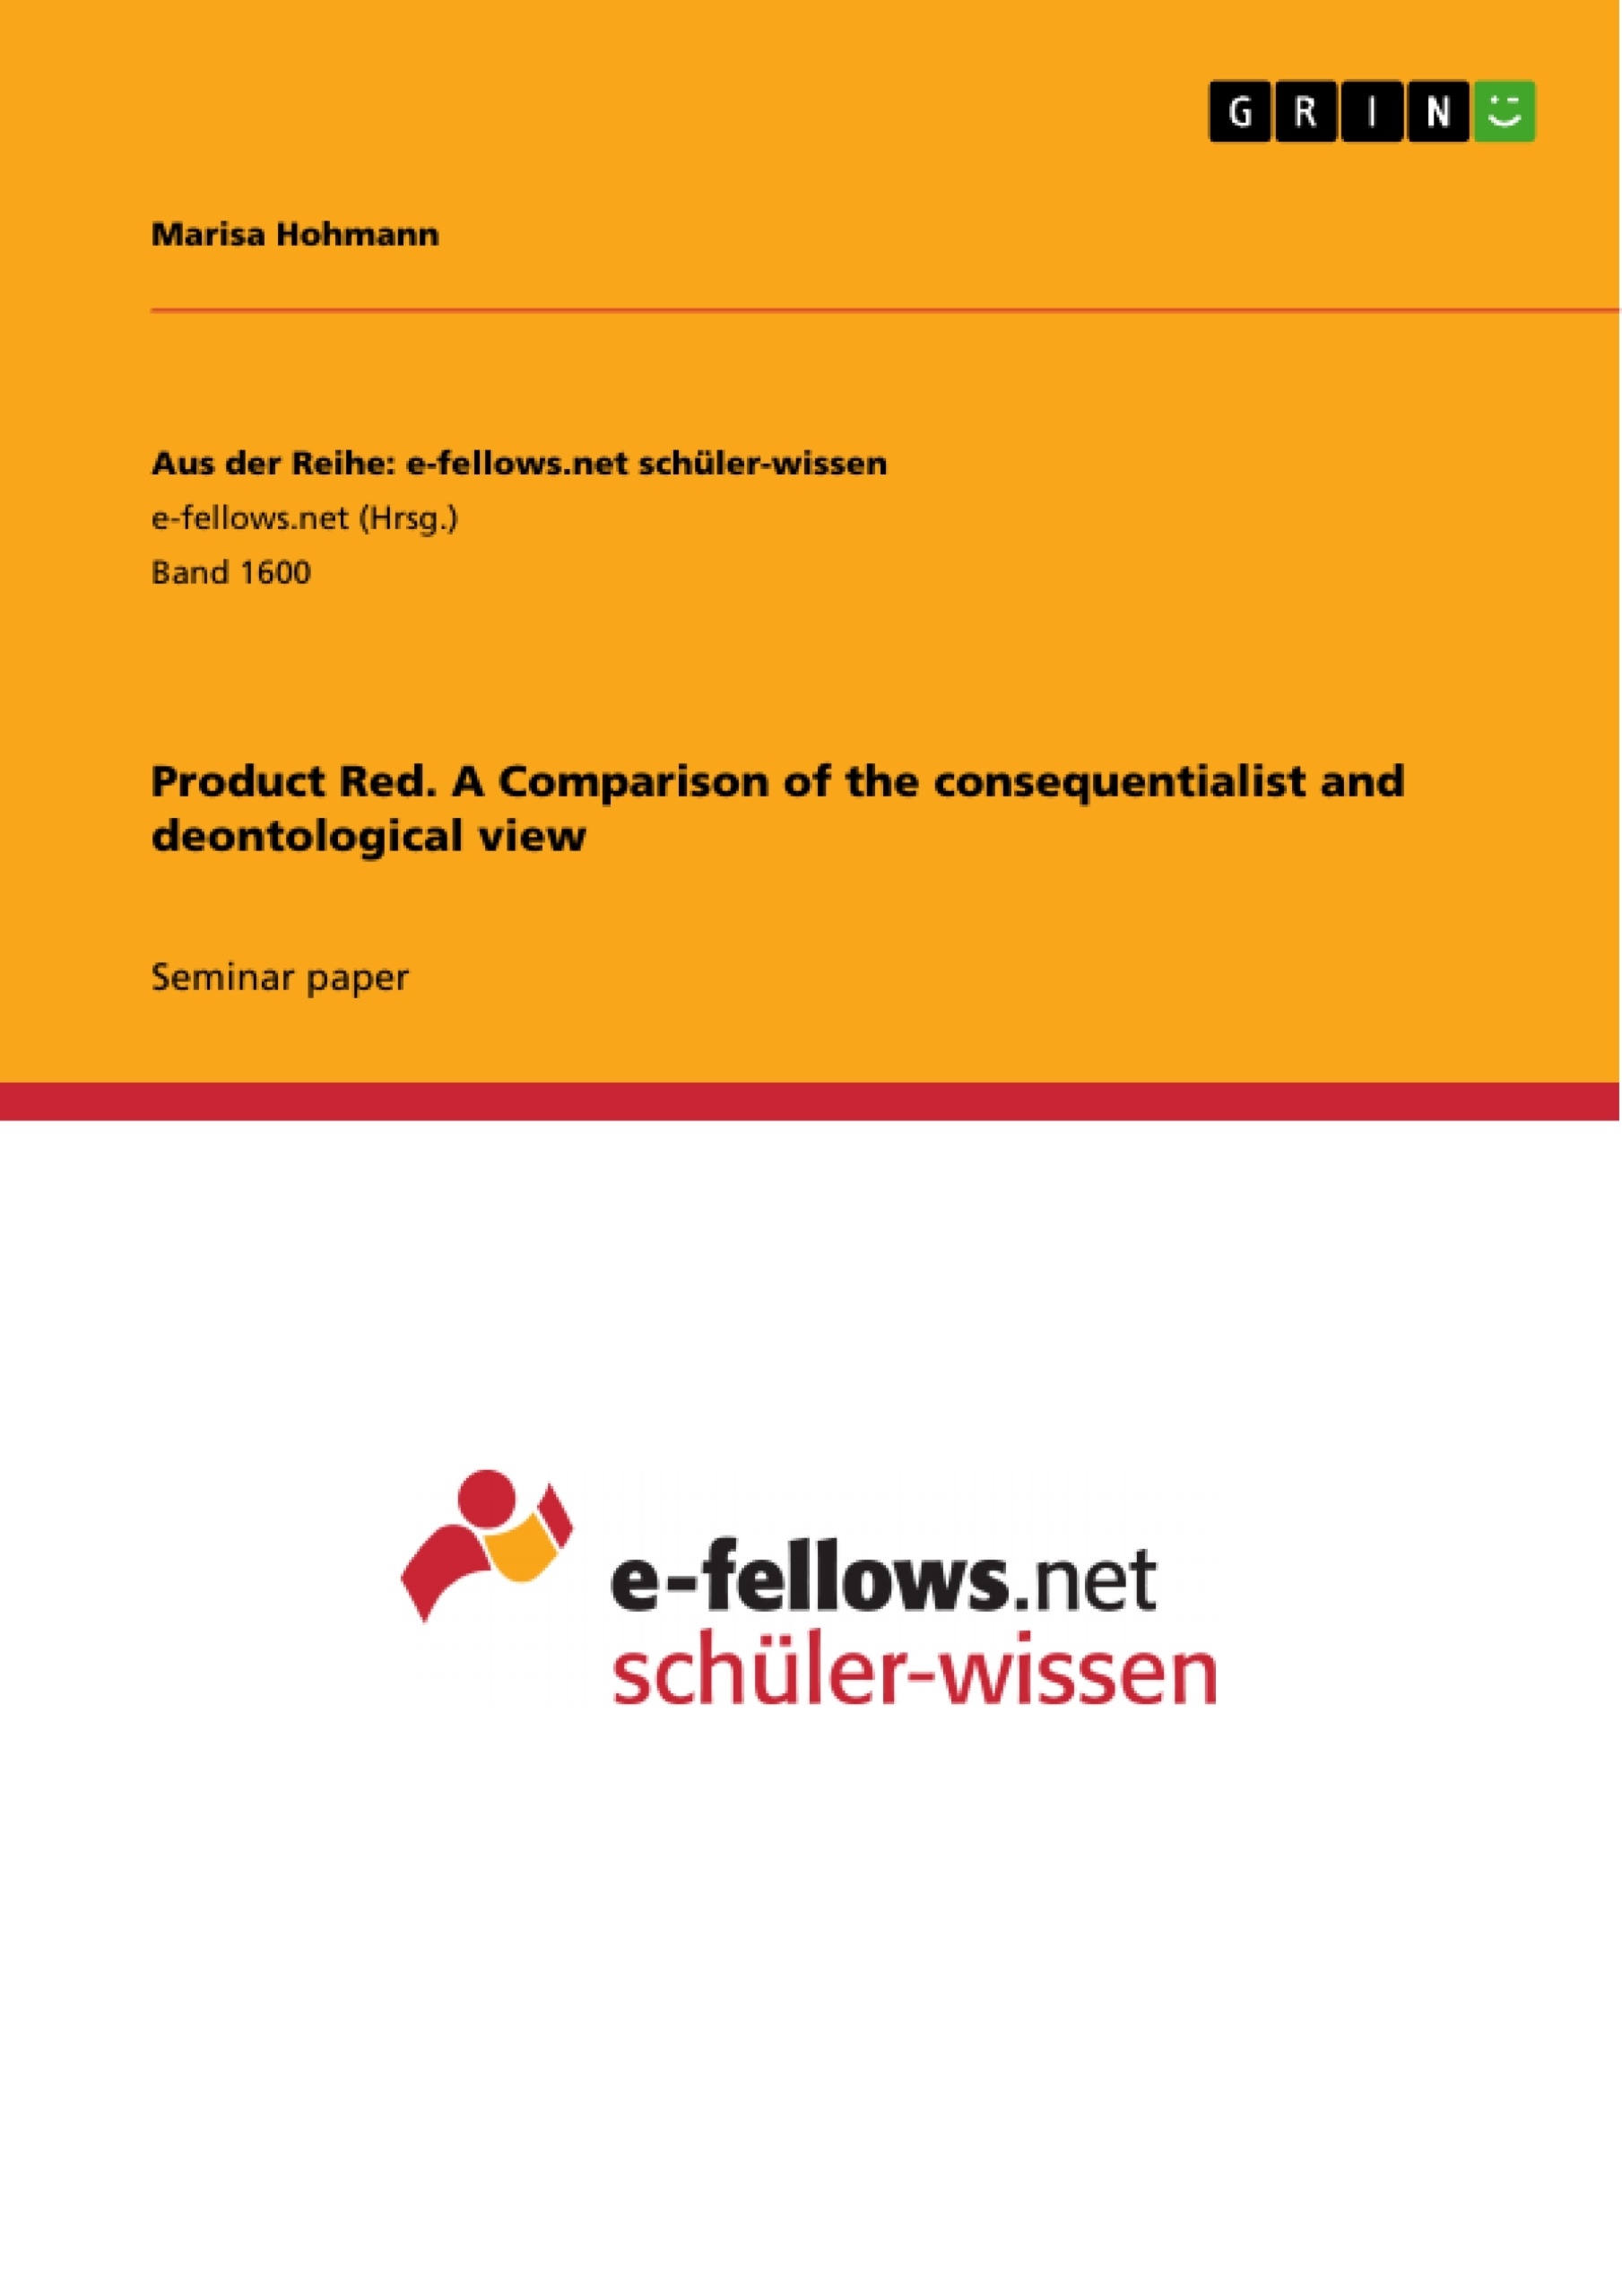 Titre: Product Red. A Comparison of the consequentialist and deontological view